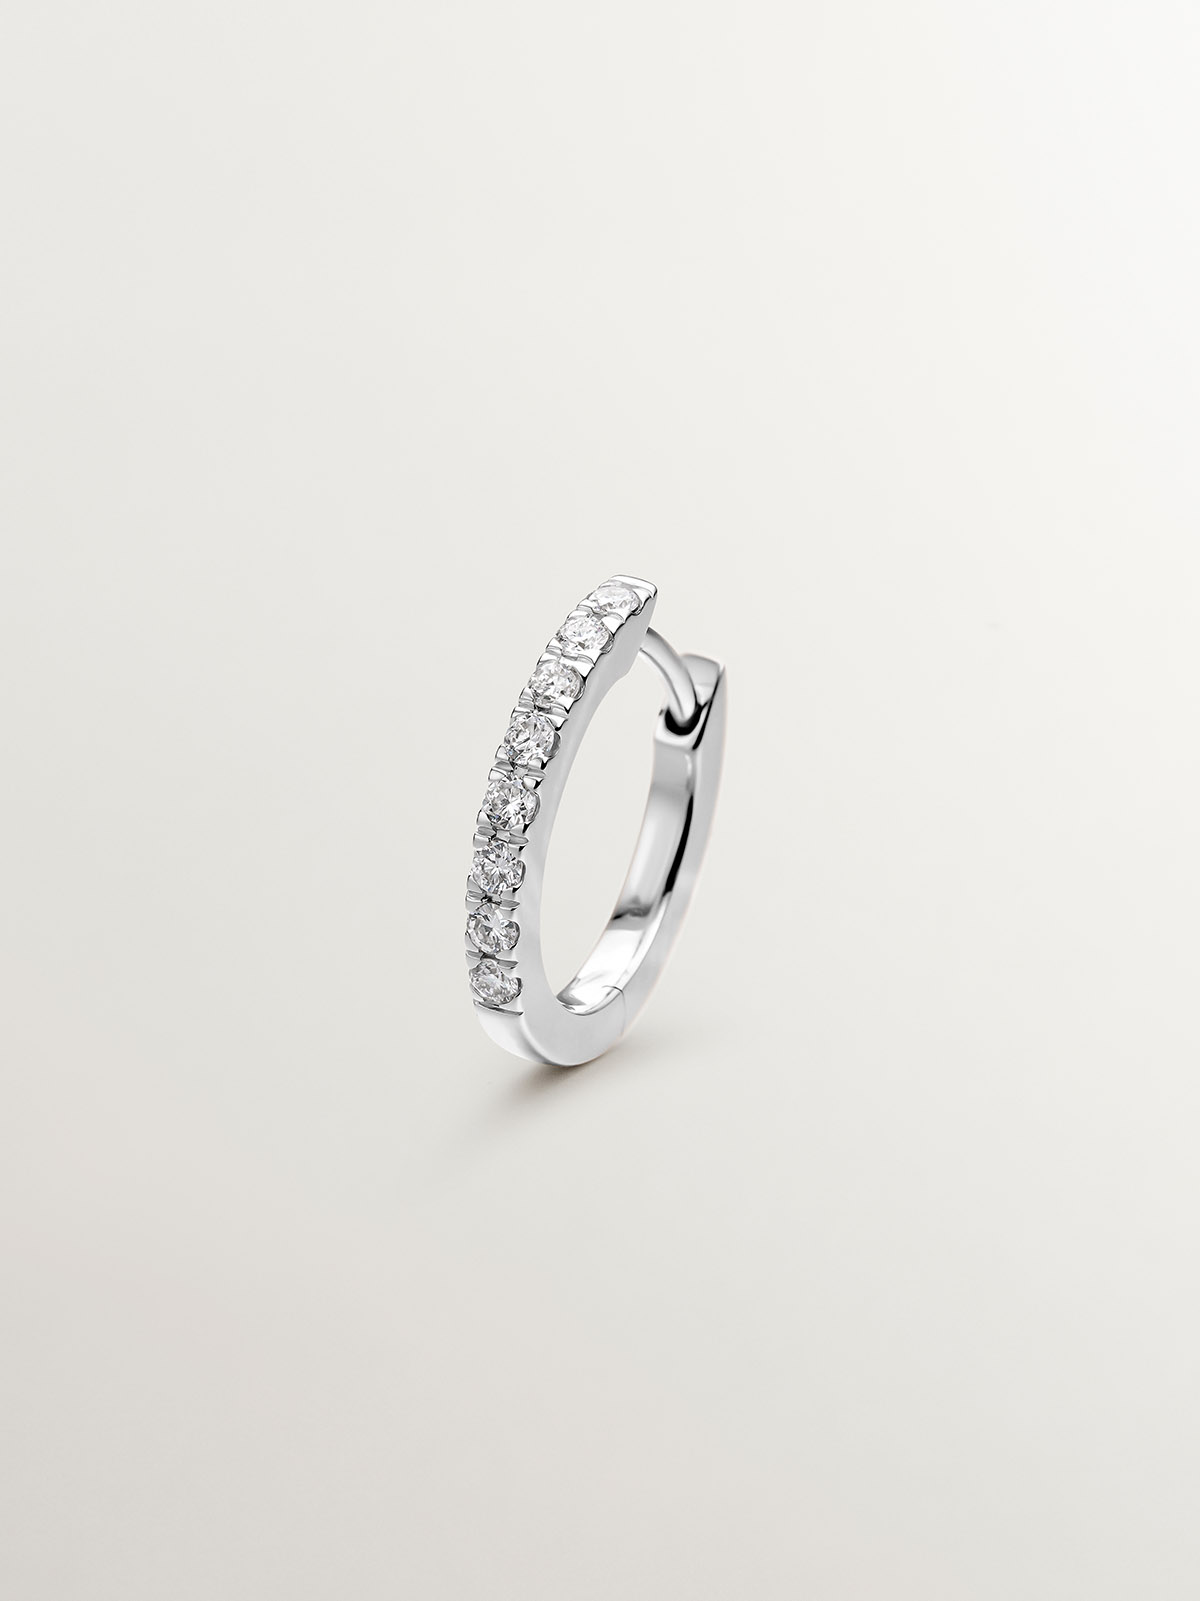 18K white gold small hoop single earring with diamonds.